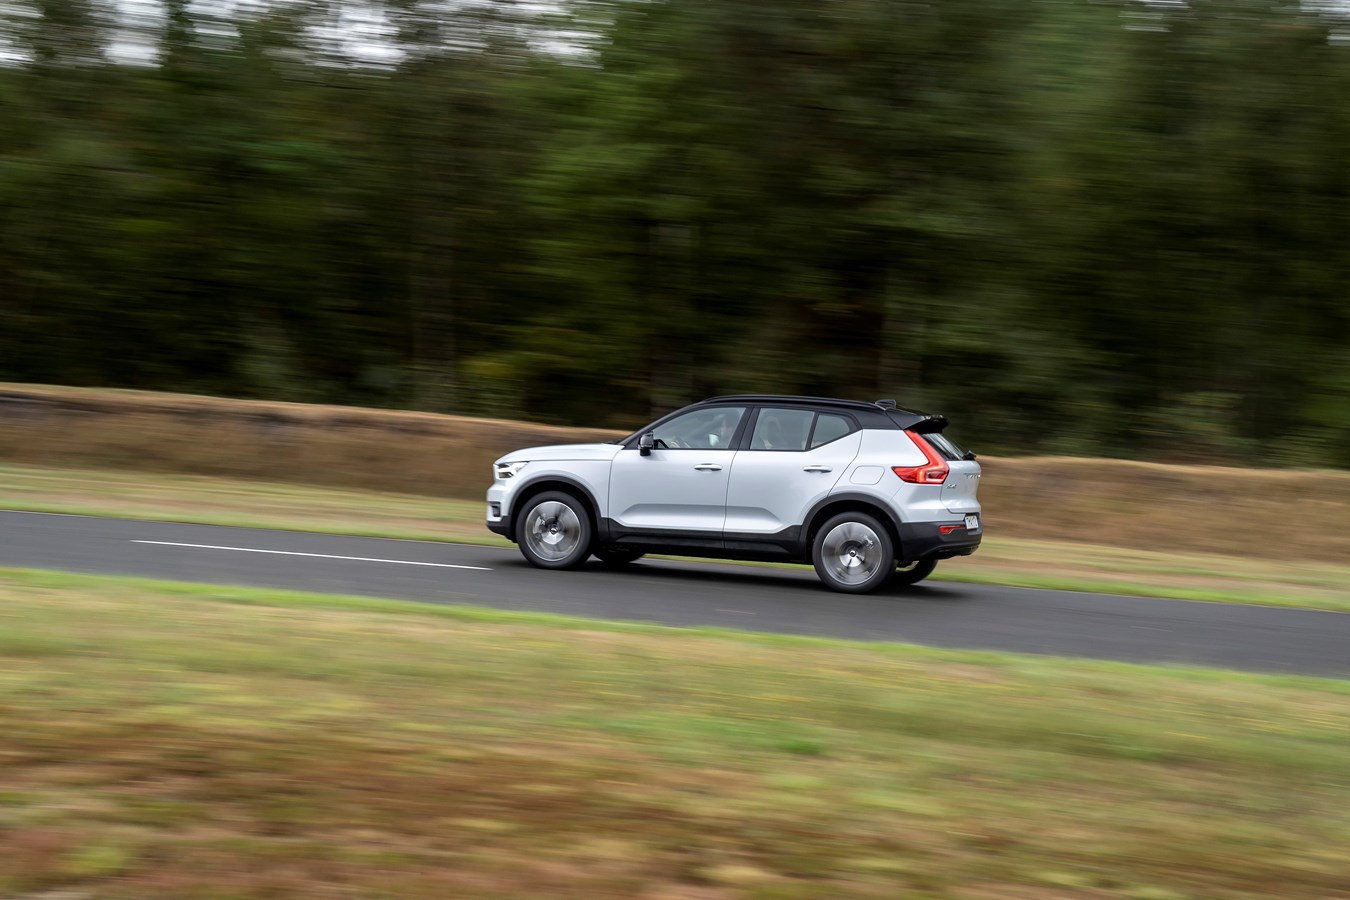 XC40 Recharge P8 AWD - Mortefontaine - septembre 2020